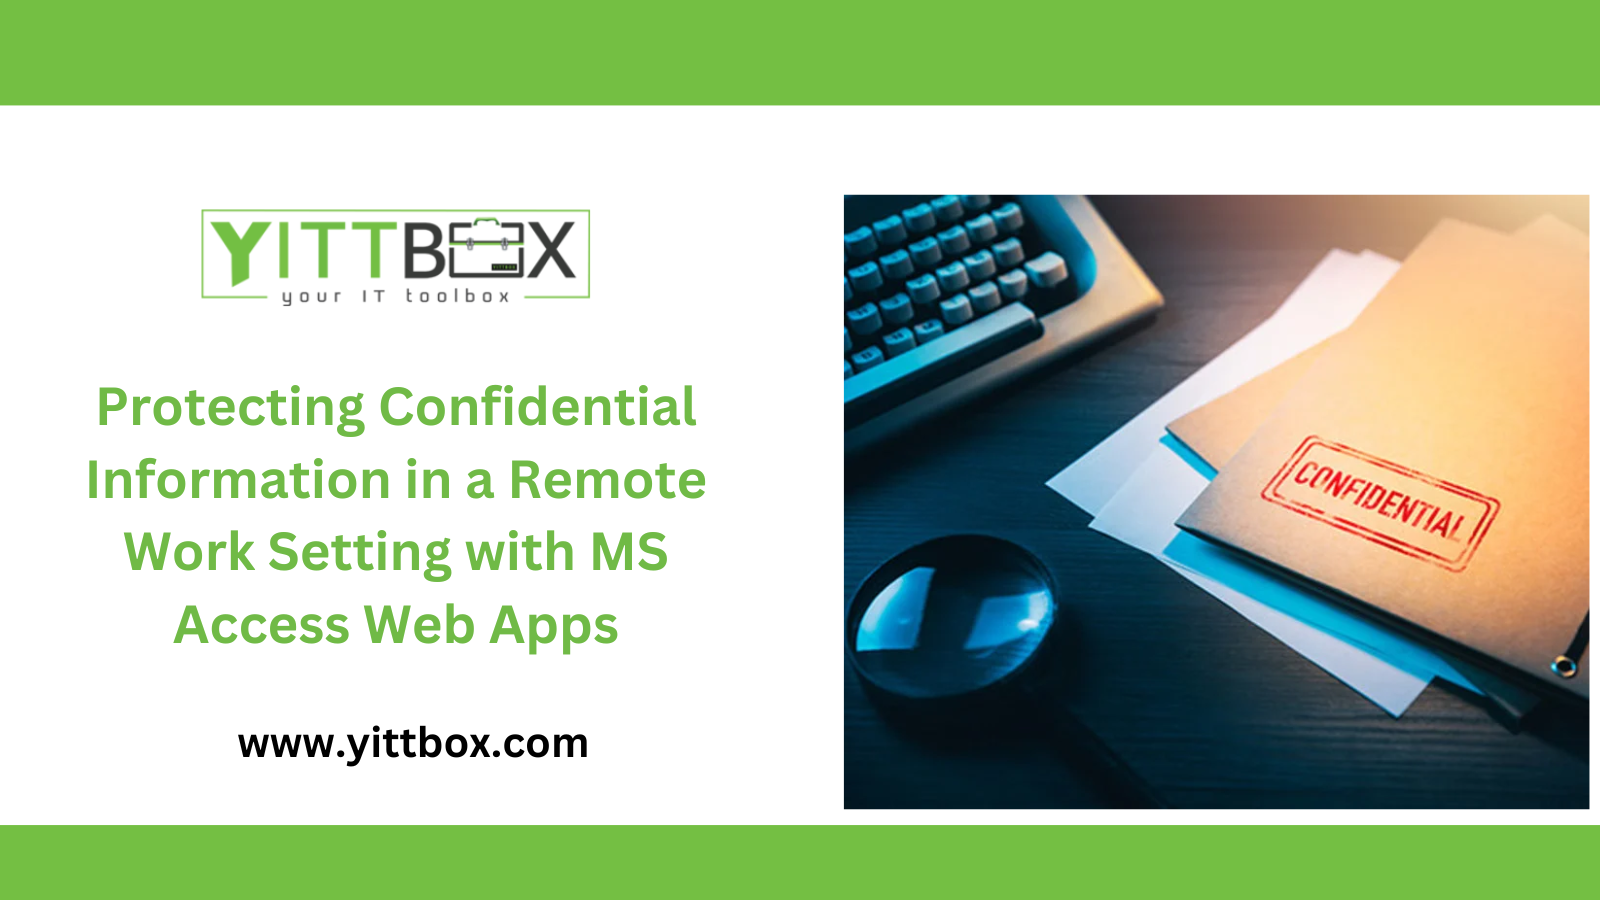 Protecting Confidential Information in a Remote Work Setting with MS Access Web Apps